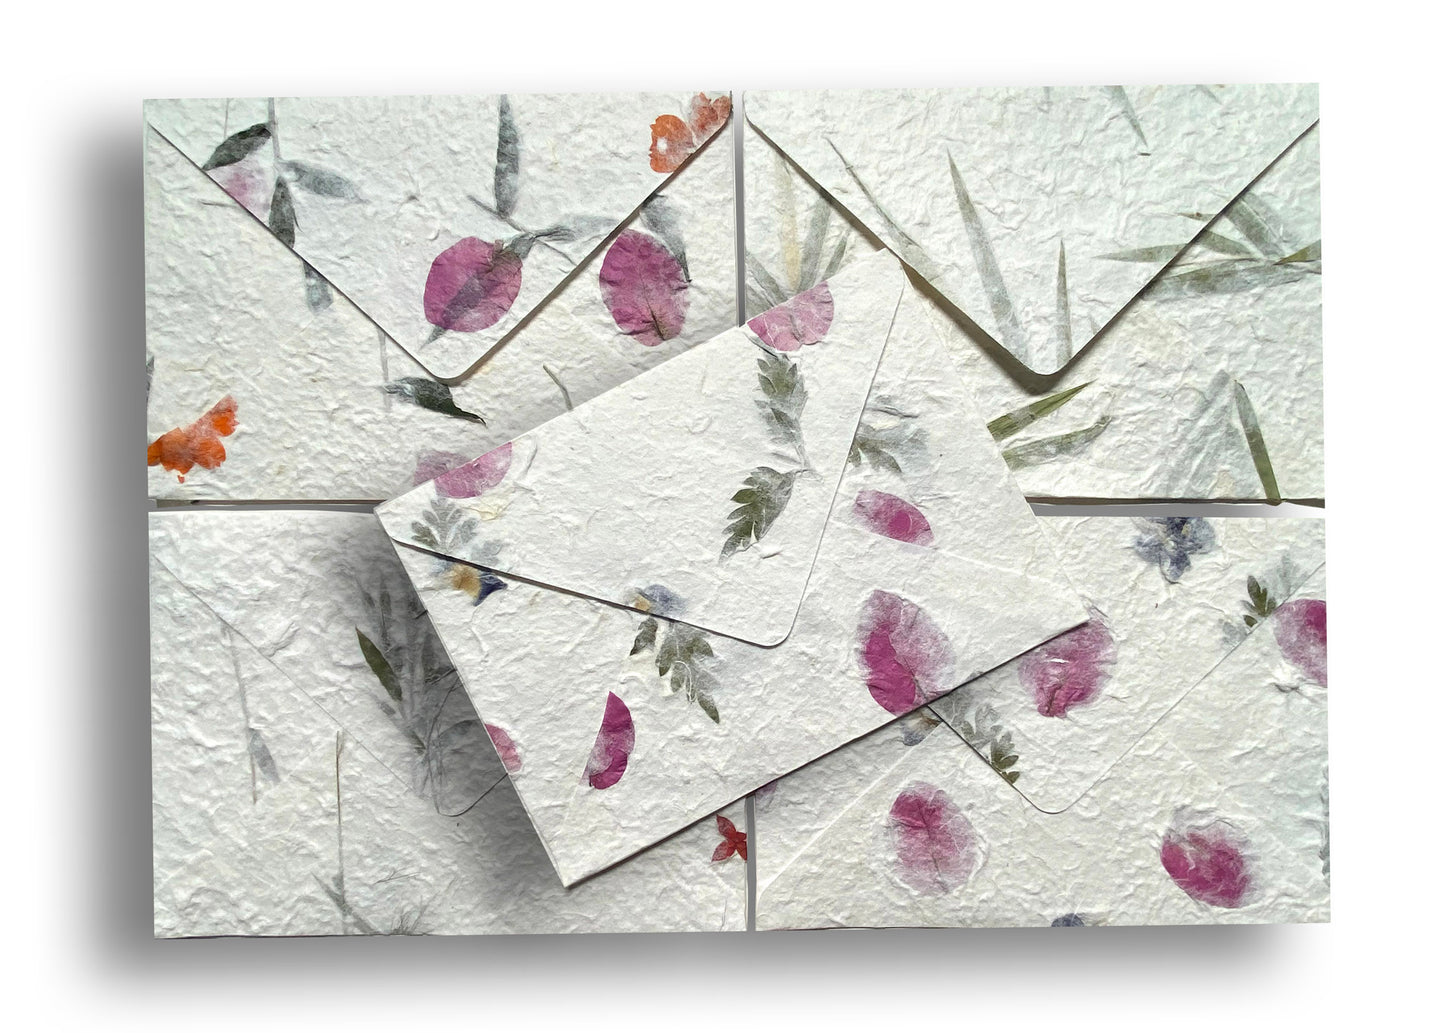 10 Envelope Per Pack Mulberry Paper Pressed Flower Inclusion Paper Handmade Envelope 16 x 23.5 CM - SIZE 6.3 x 9.0 INCH